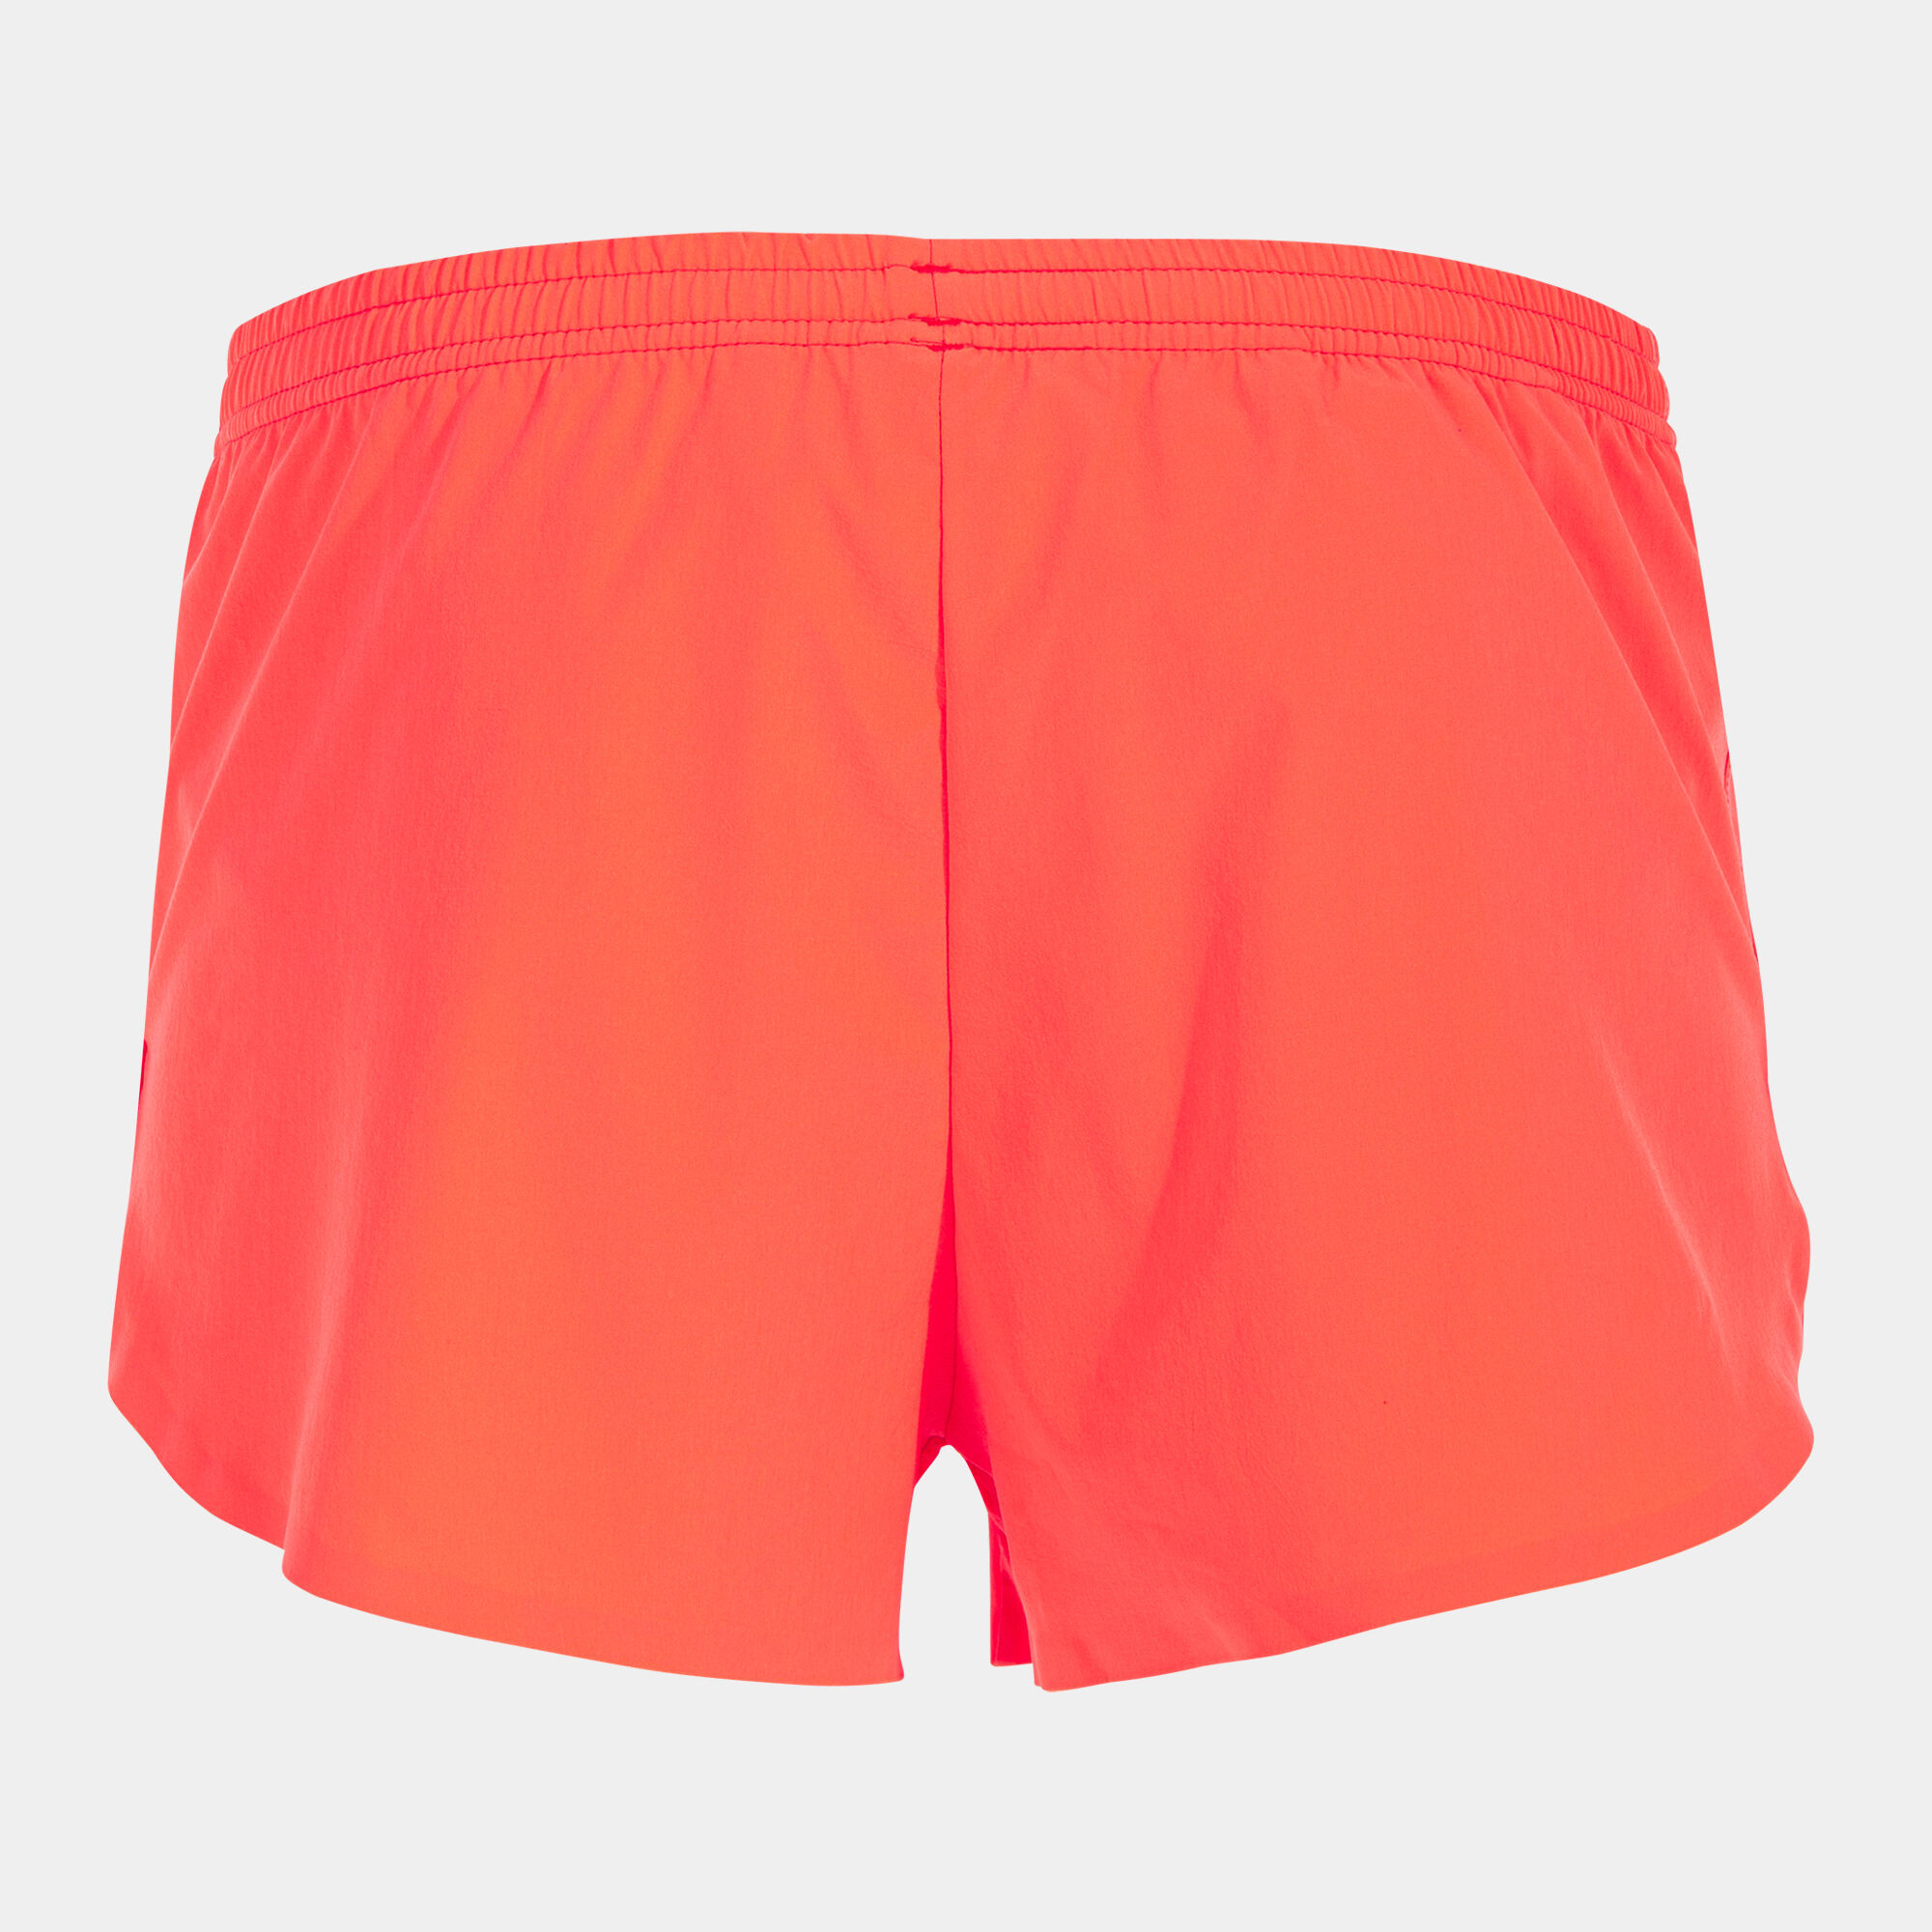 Short homme Olimpia corail fluo